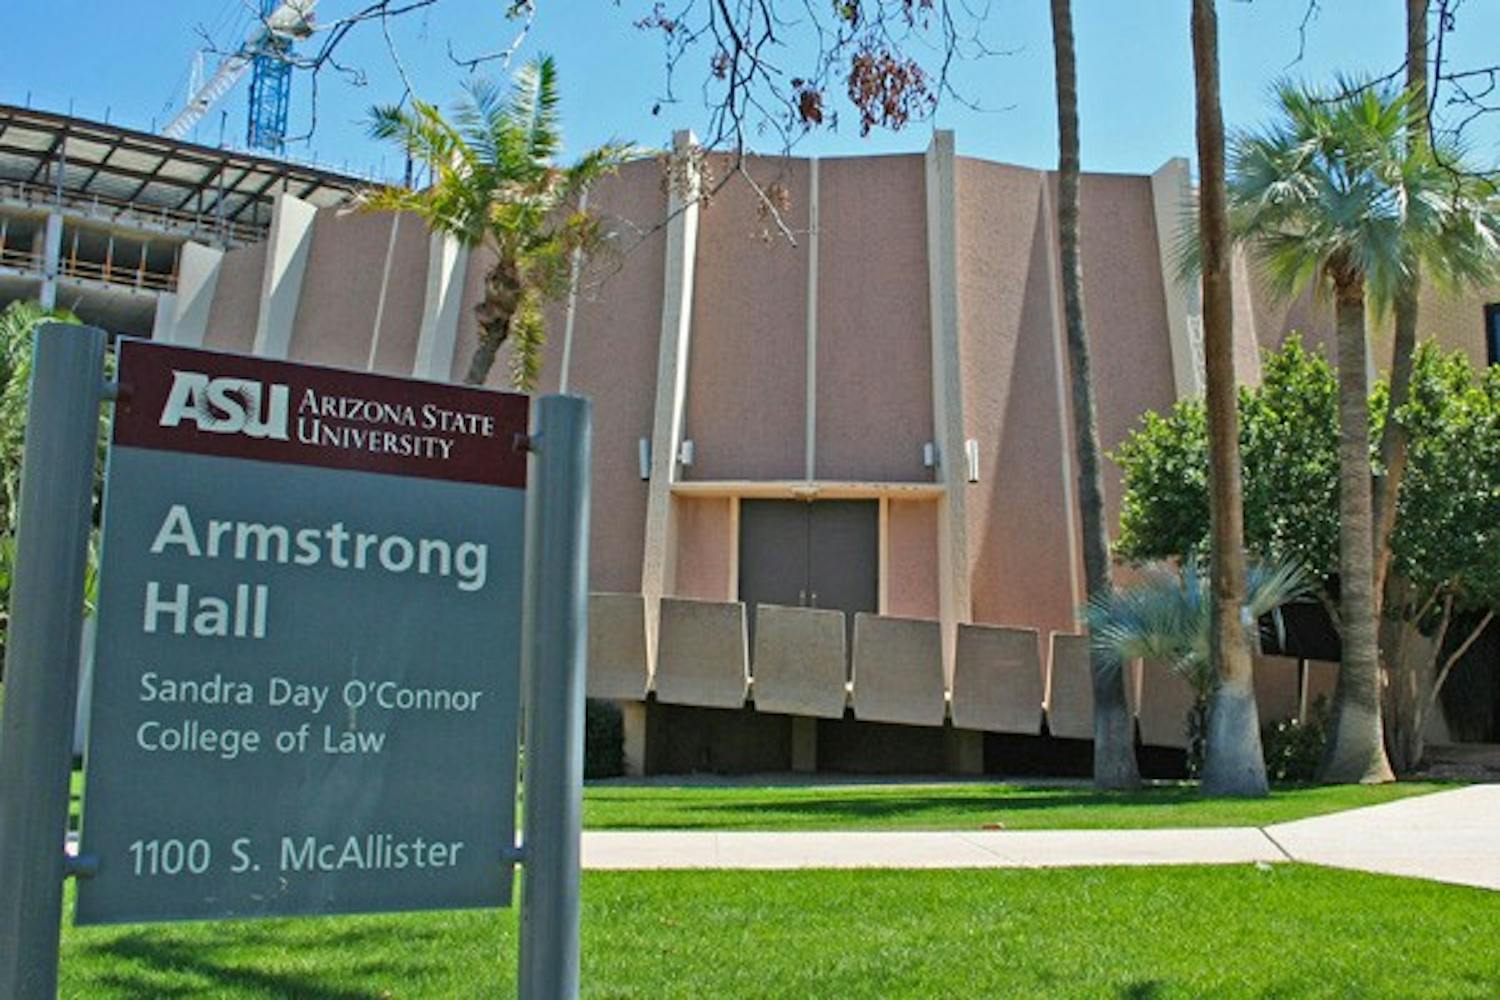 PARTING WAYS: A long-term plan from ASU's Sandra Day O'Connor College of Law could make the school financially independent through independent funding and tuition increases, as opposed to funding from ASU, which would be used for other areas. (Photo by Lisa Bartoli)